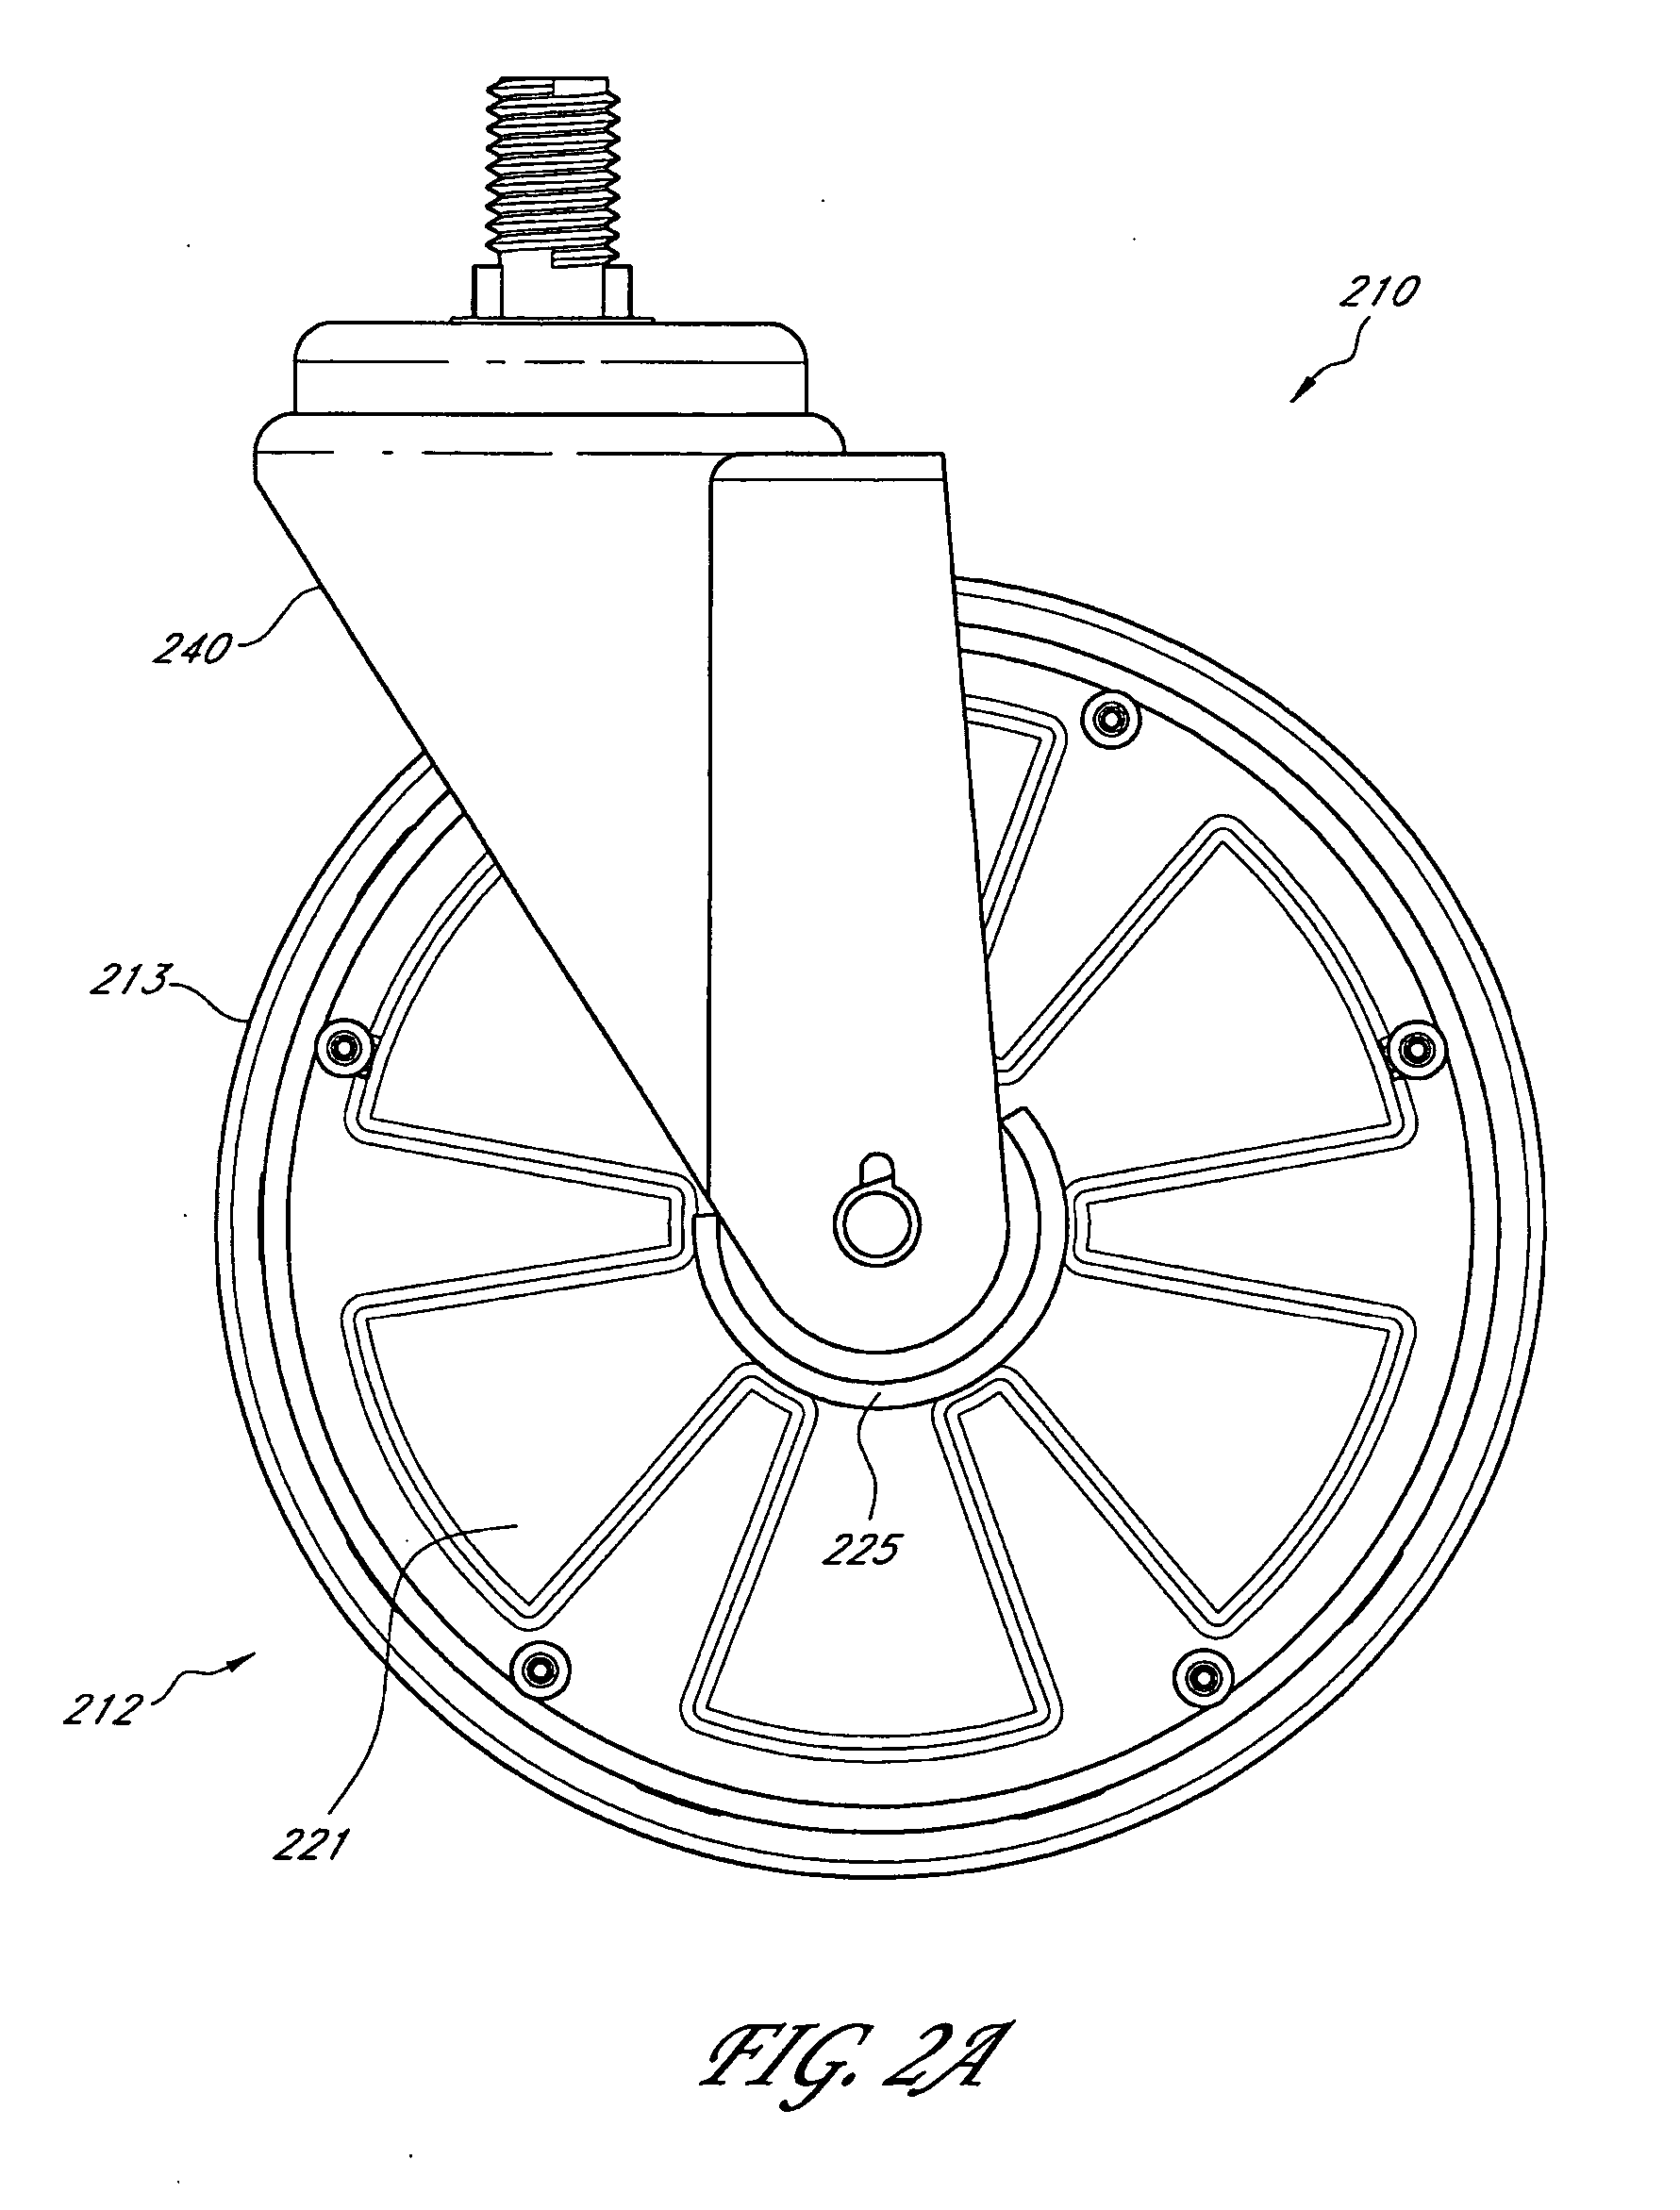 Power generation systems and methods for wheeled objects